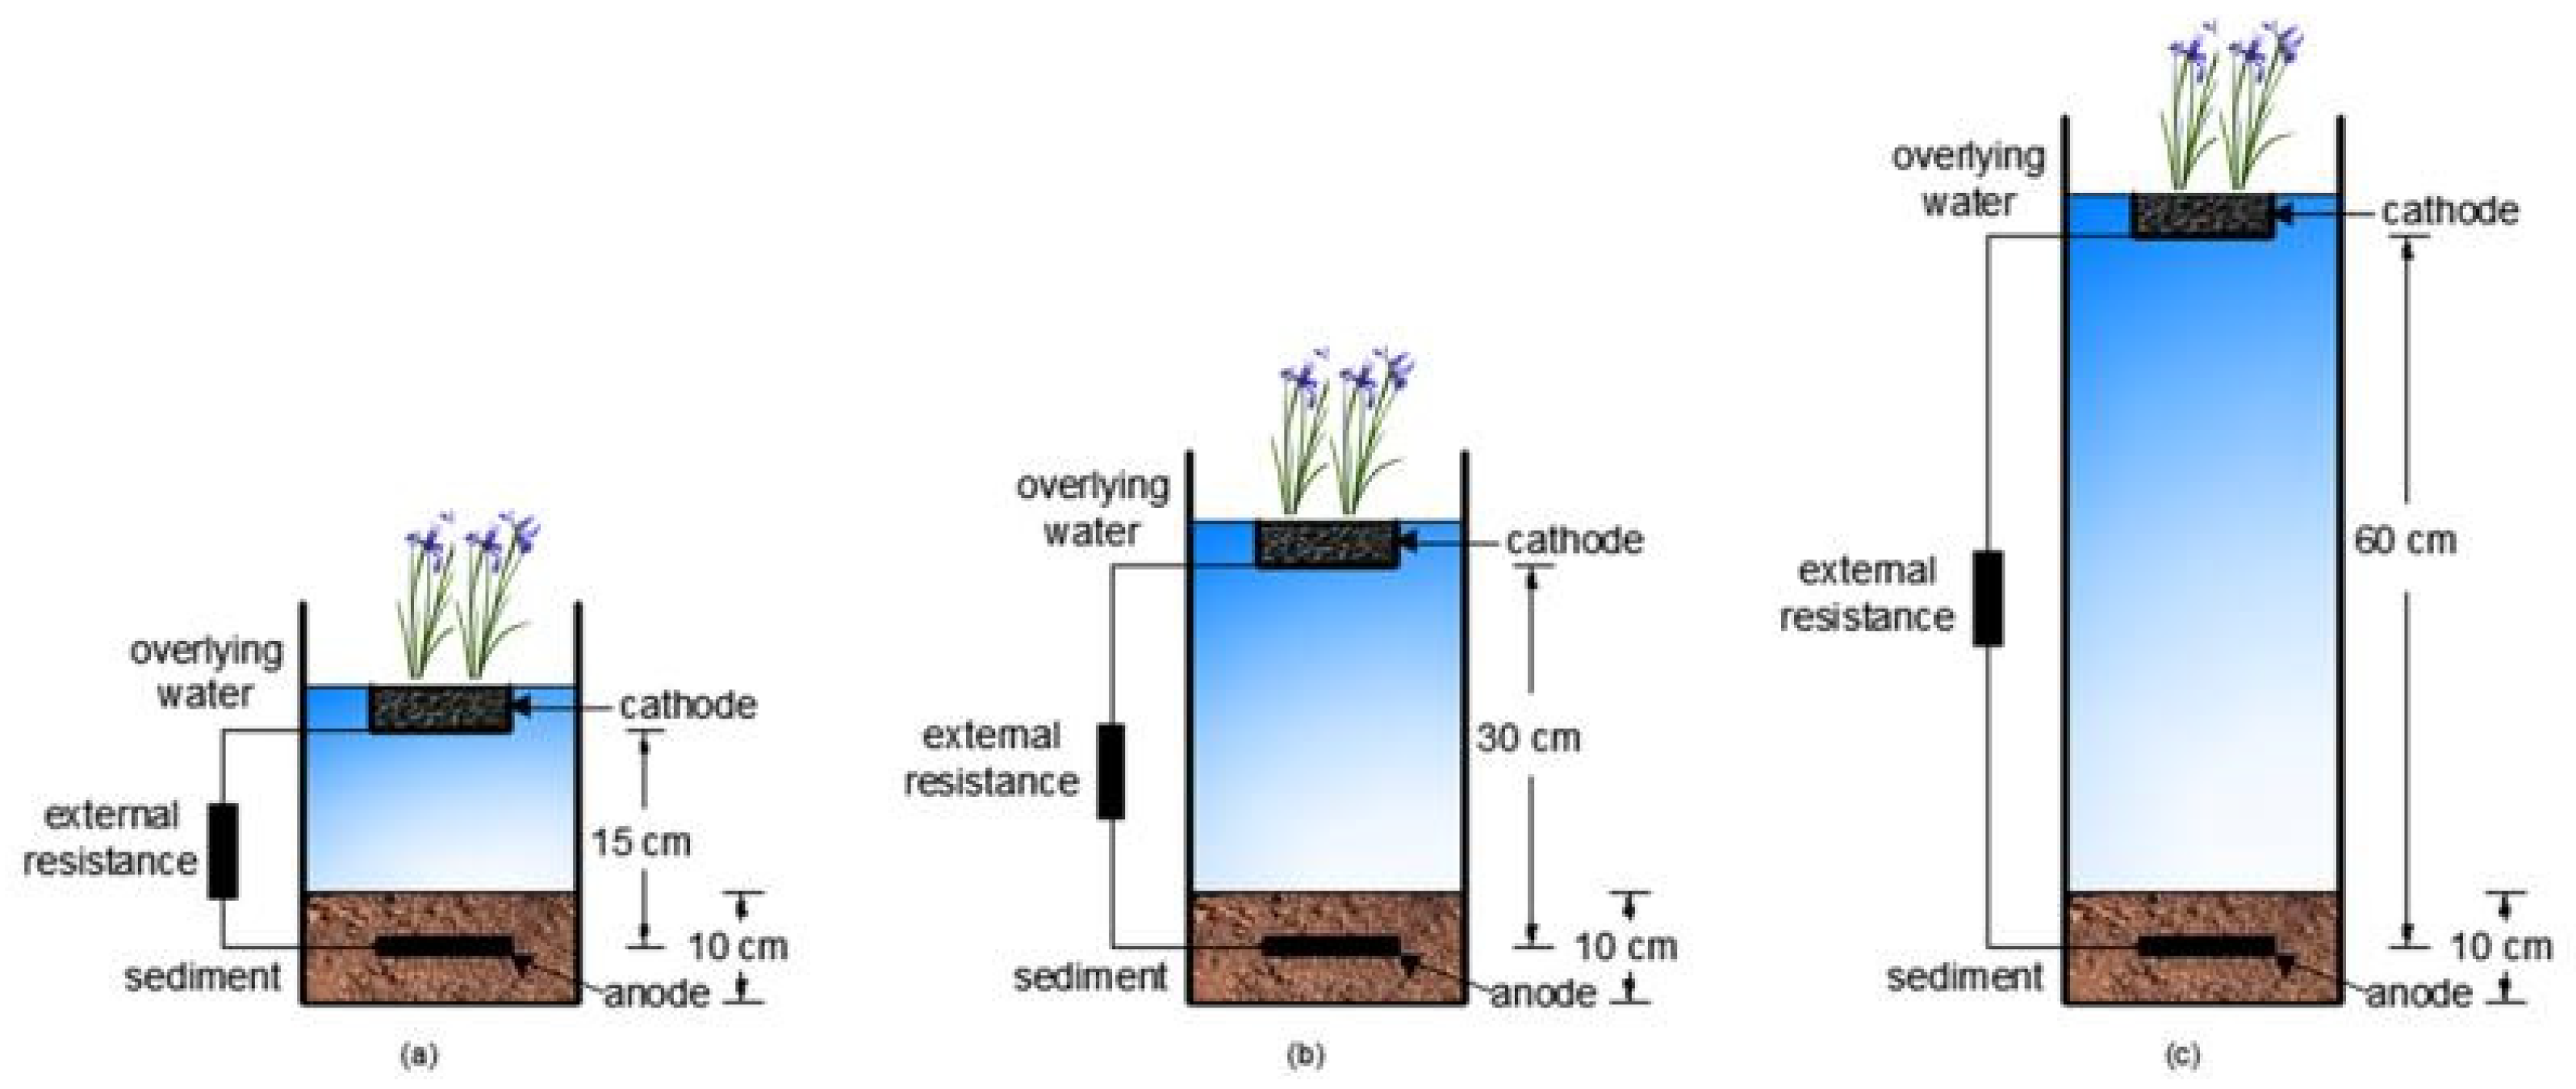 IJERPH | Free Full-Text | Effect of Electrode Distances on Remediation of  Eutrophic Water and Sediment by Sediment Microbial Fuel Cell Coupled  Floating Beds | HTML